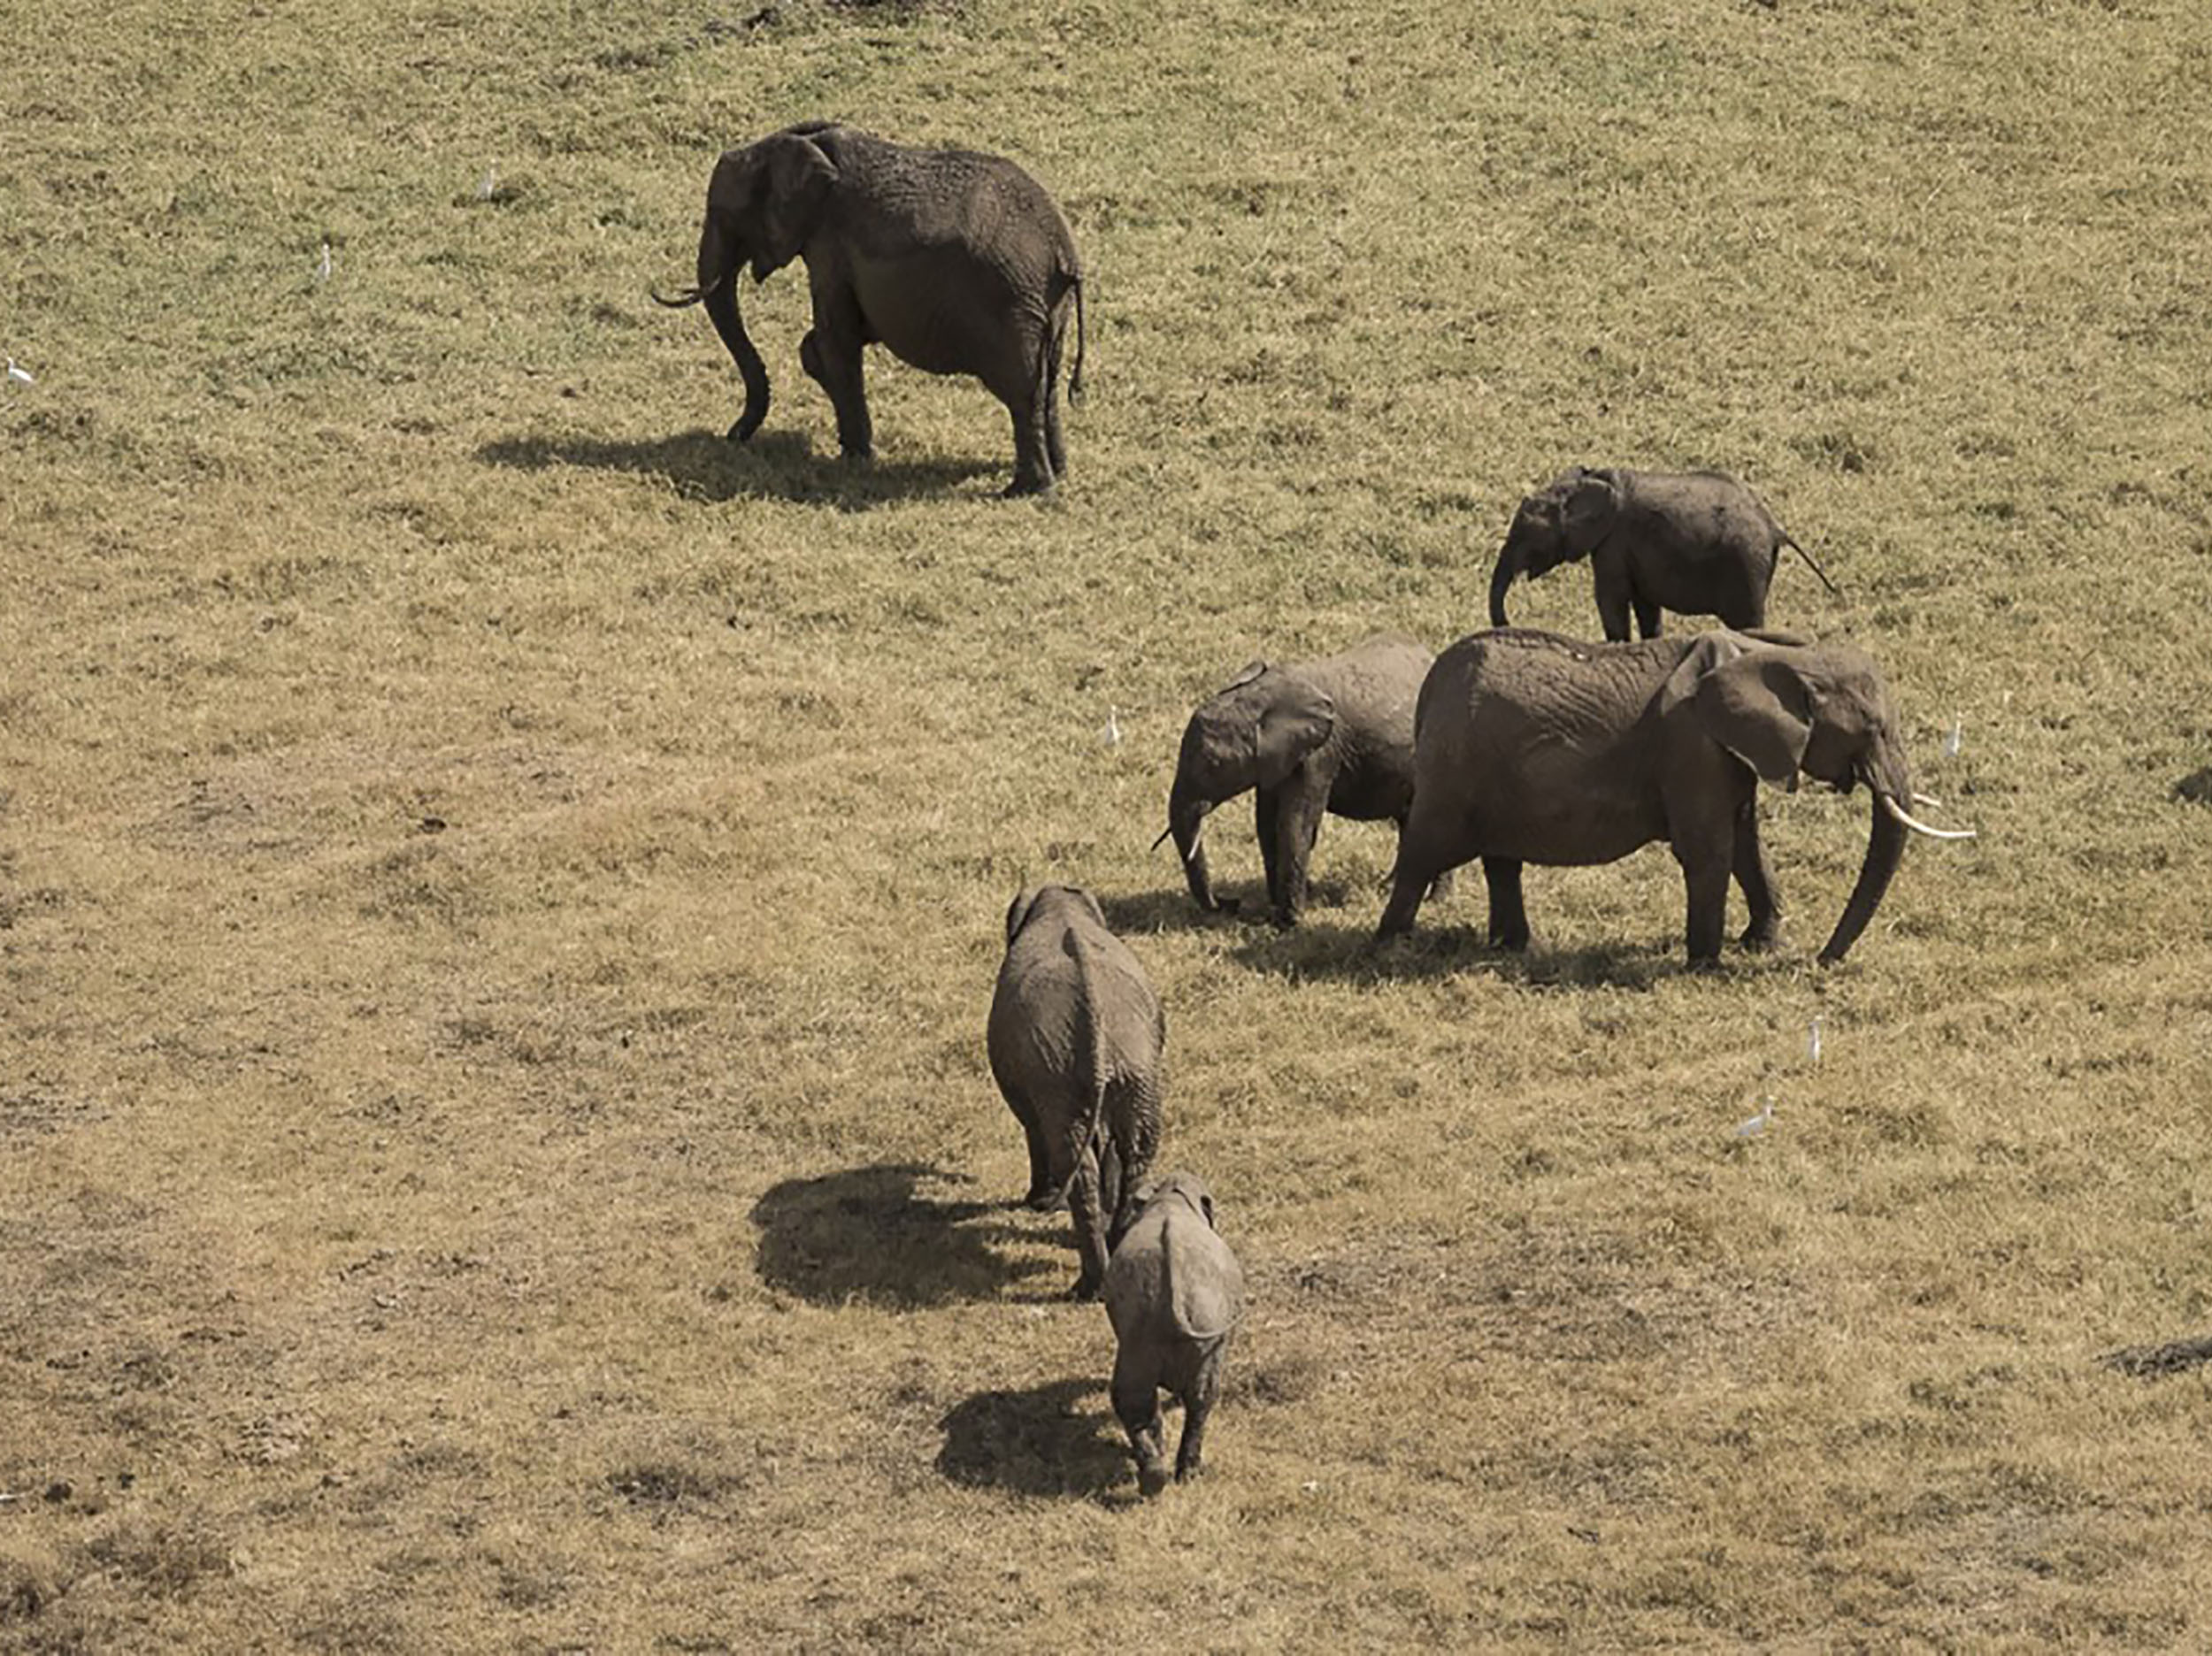 Ol Pejeta: The promise of conservation and the cloud